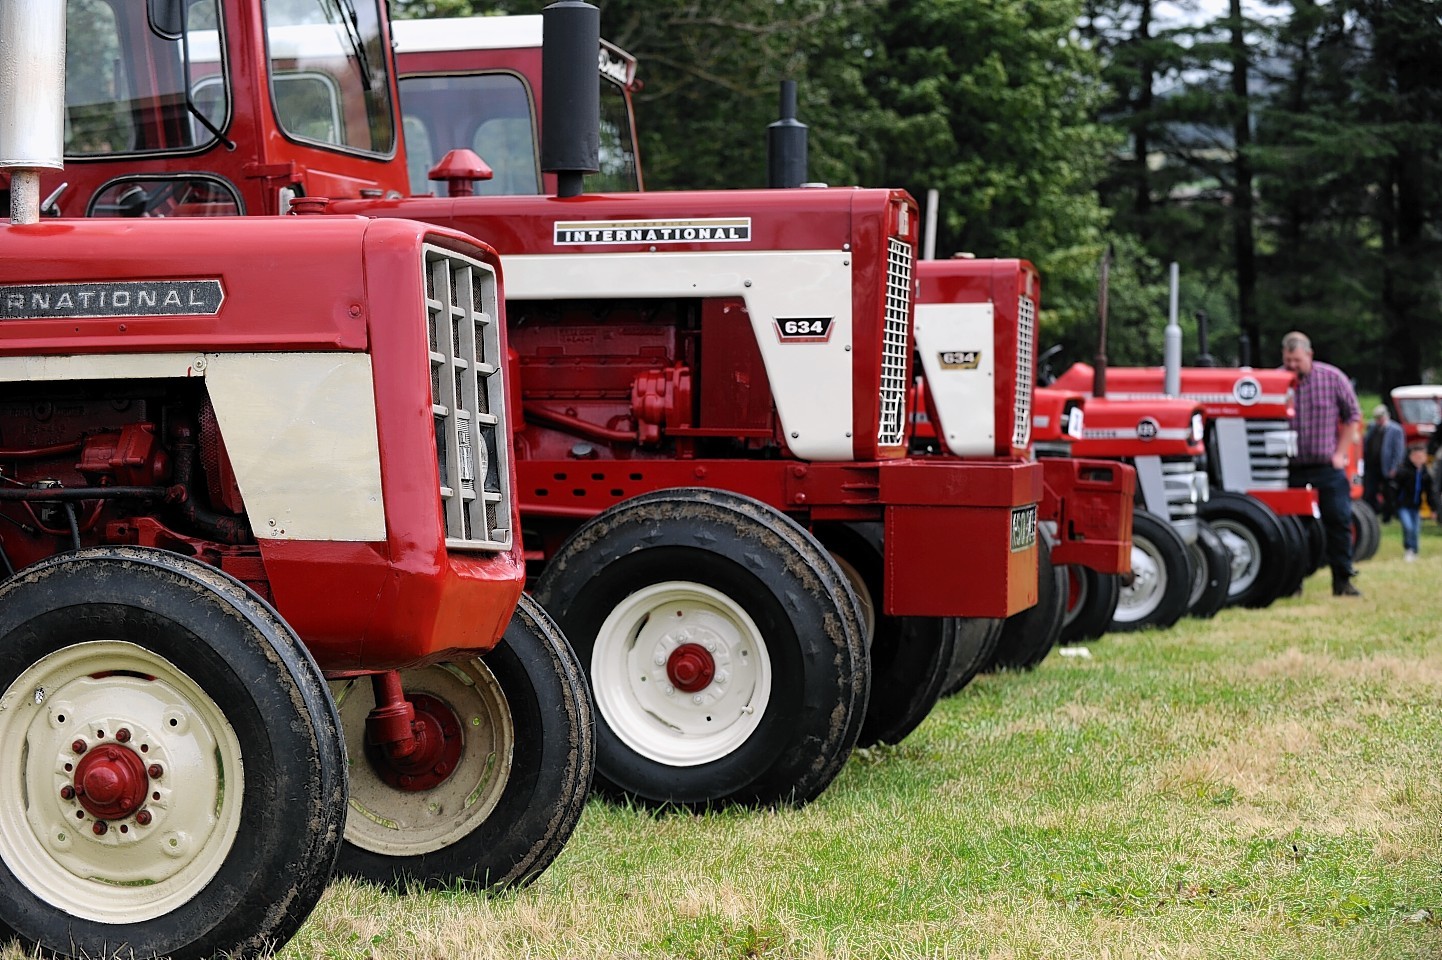 The Keith Show 2016 - A lineup of vintage tractors.